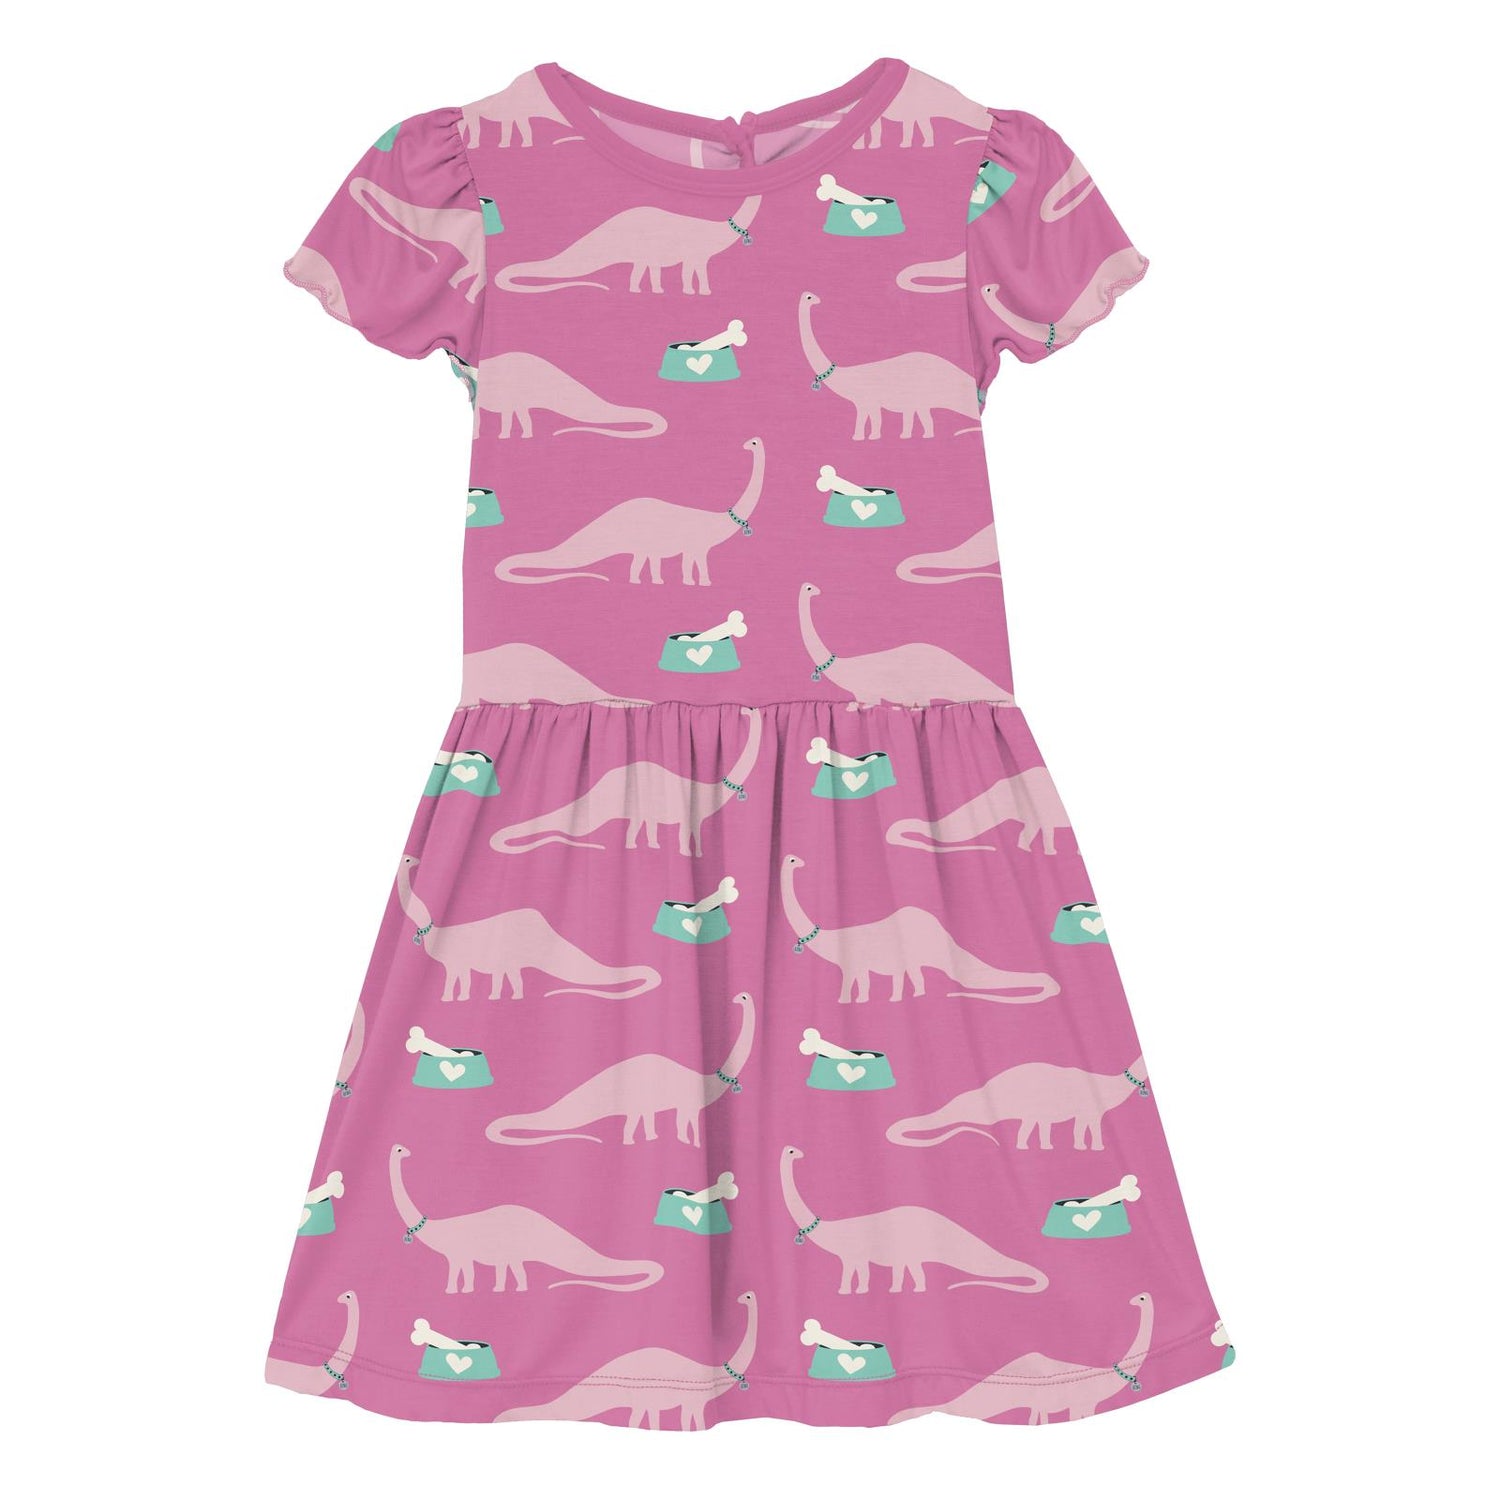 Print Flutter Sleeve Twirl Dress with Pockets in Tulip Pet Dino